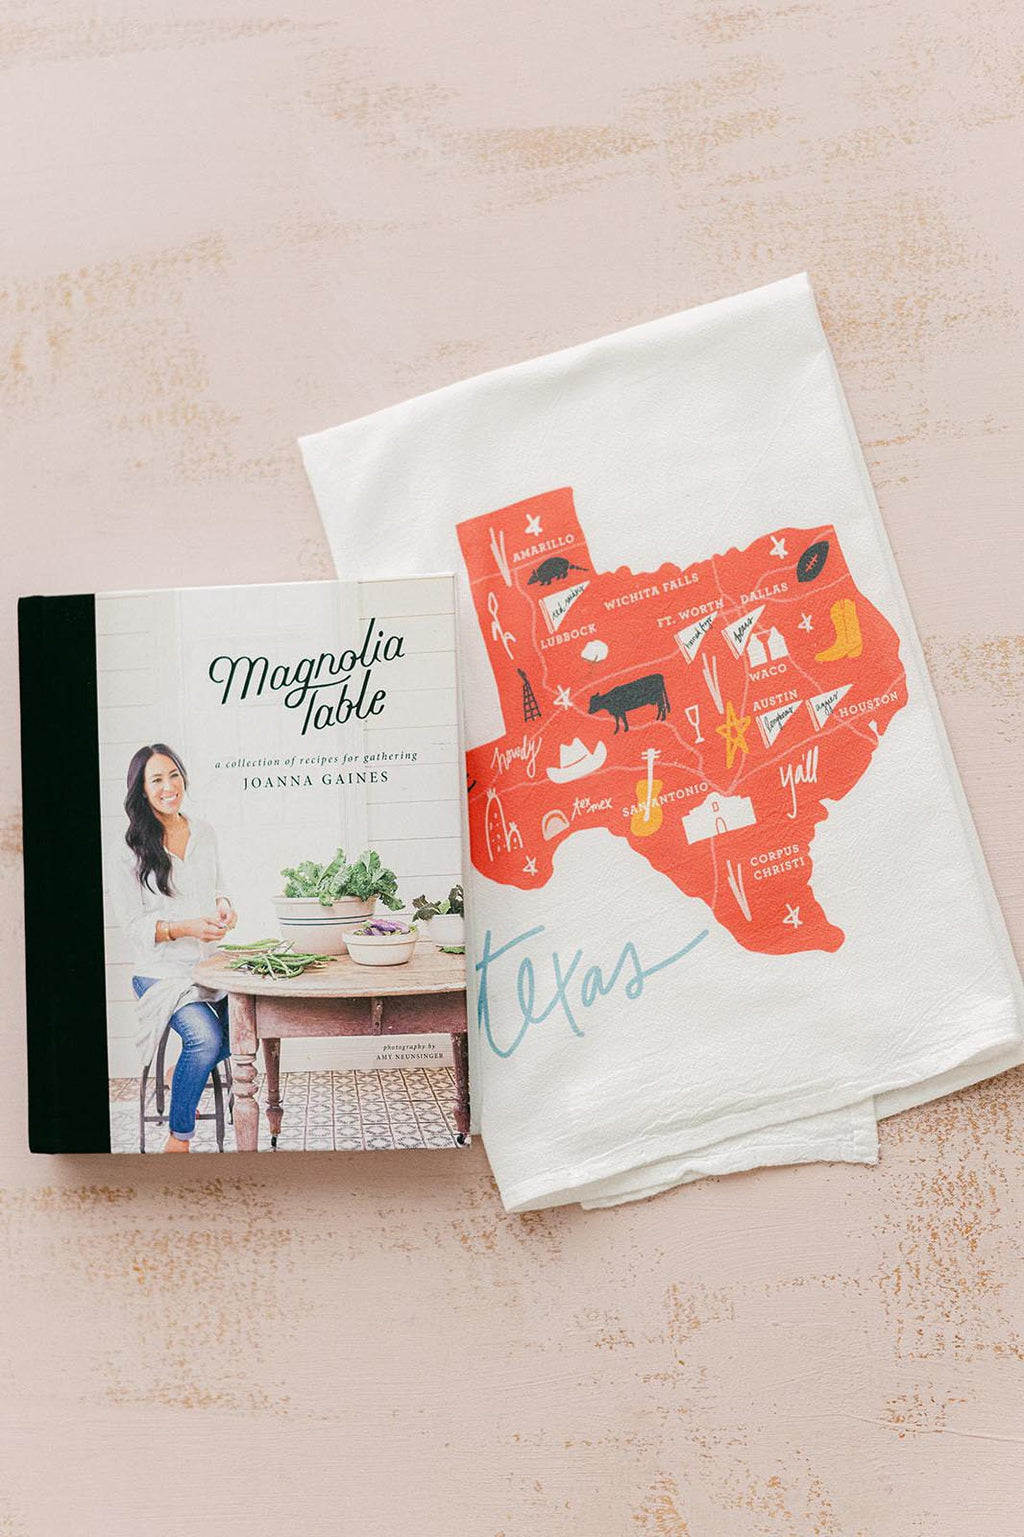 White flour sack towel with state of texas design with texas cities in a 5 color design by Doe a Deer Designs || you can shop now at  shop.rambleandcompany.com or visit our storefront in downtown Wichita Falls, Texas || small batch + hand printed tees | home goods | paper goods | gifts + more